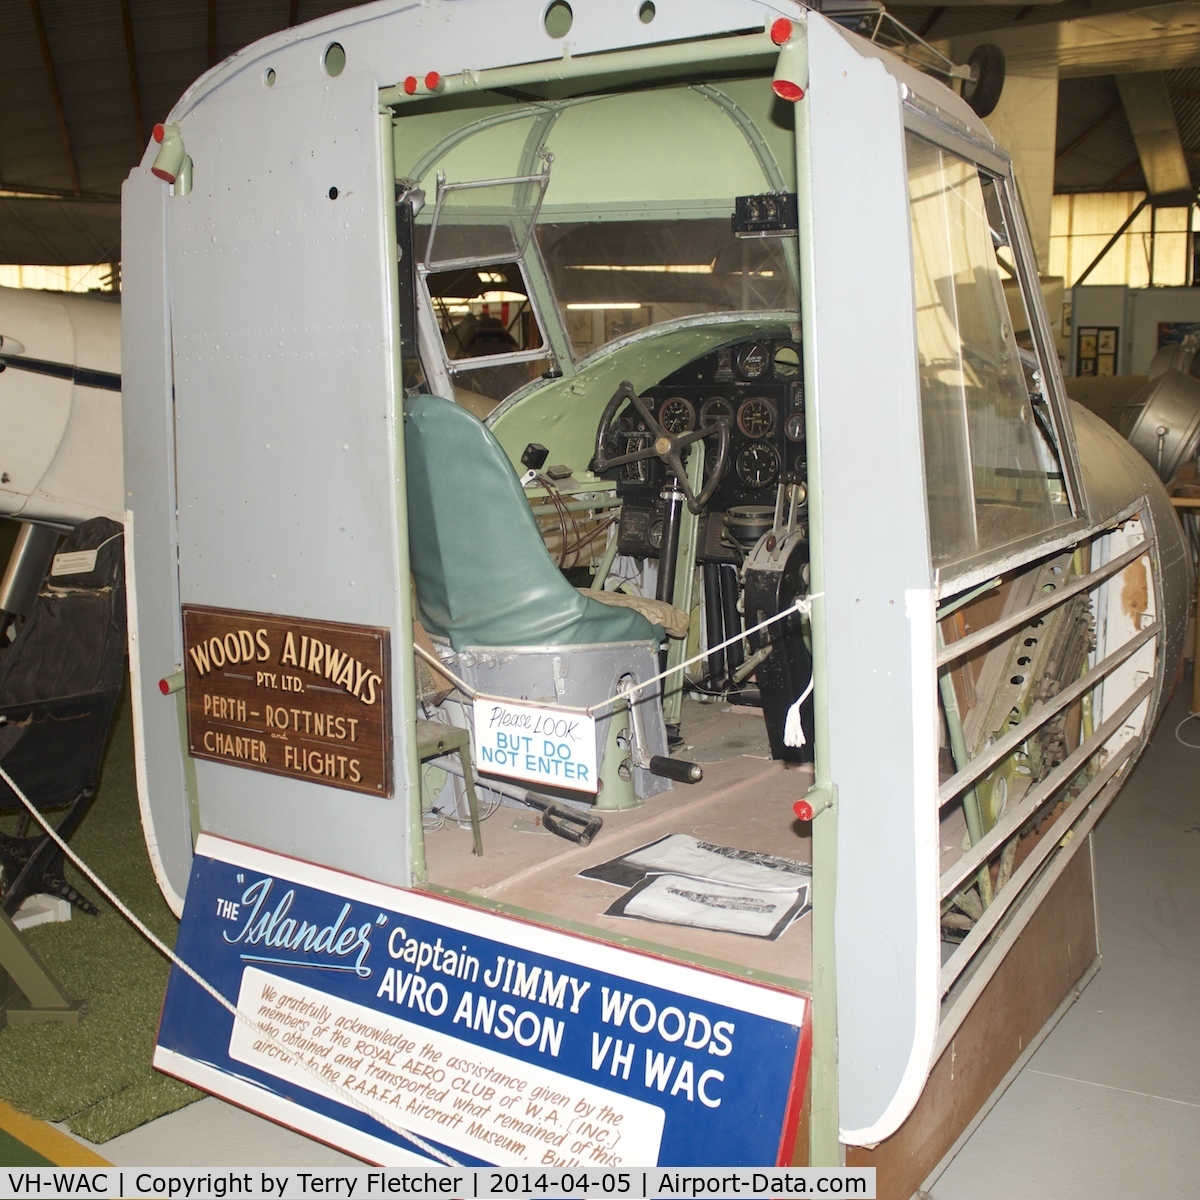 VH-WAC, Avro 652A Anson 1 C/N MG271, Cockpit of Avro 652A Anson 1, c/n: MG271 at Perth Aviation Heritage Museum